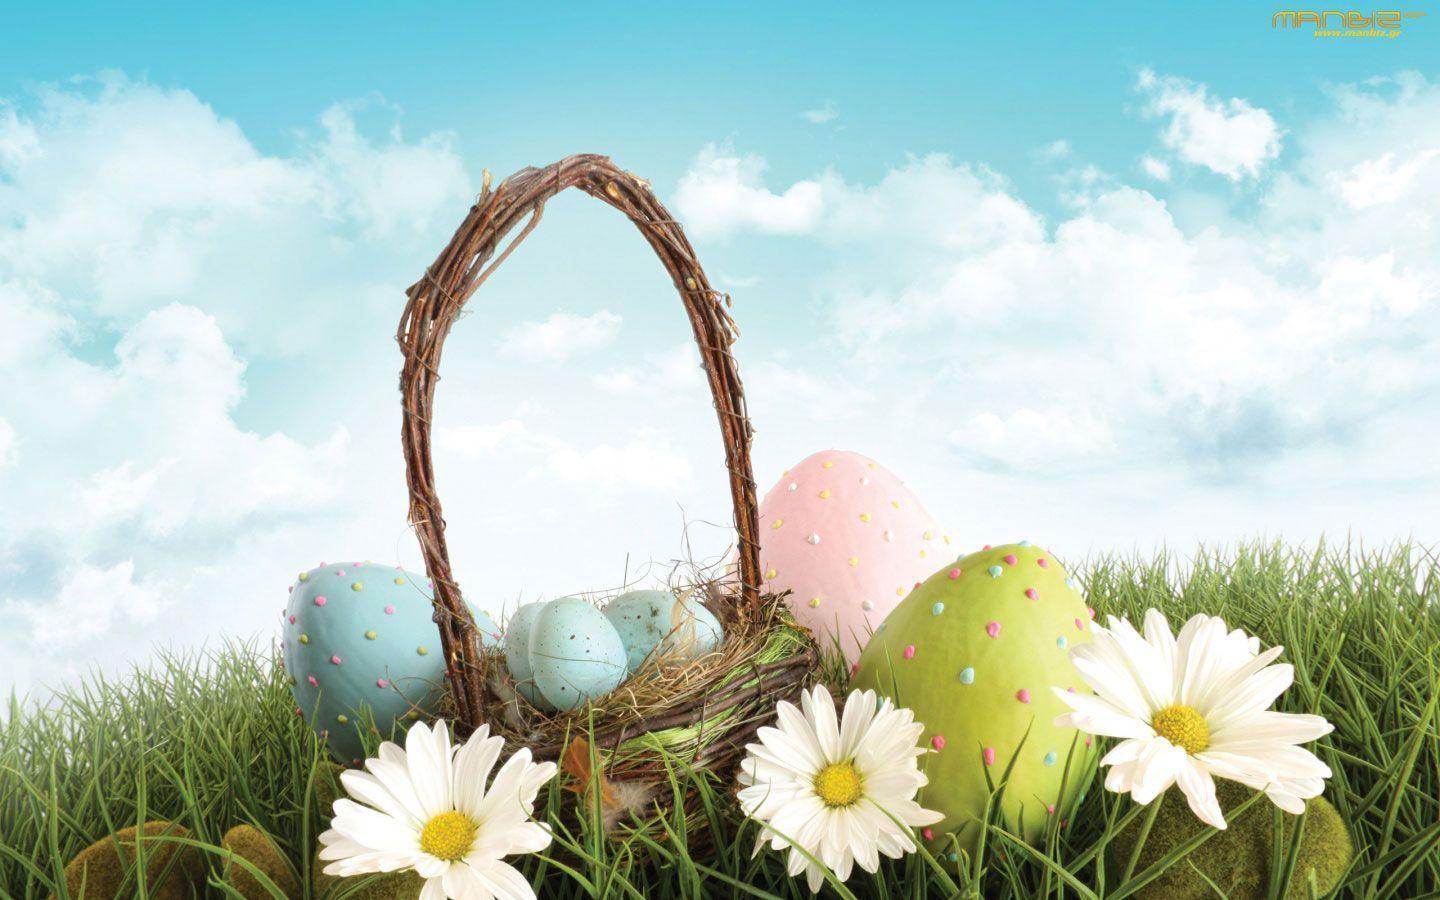 Happy Easter wallpaper (24 picture)